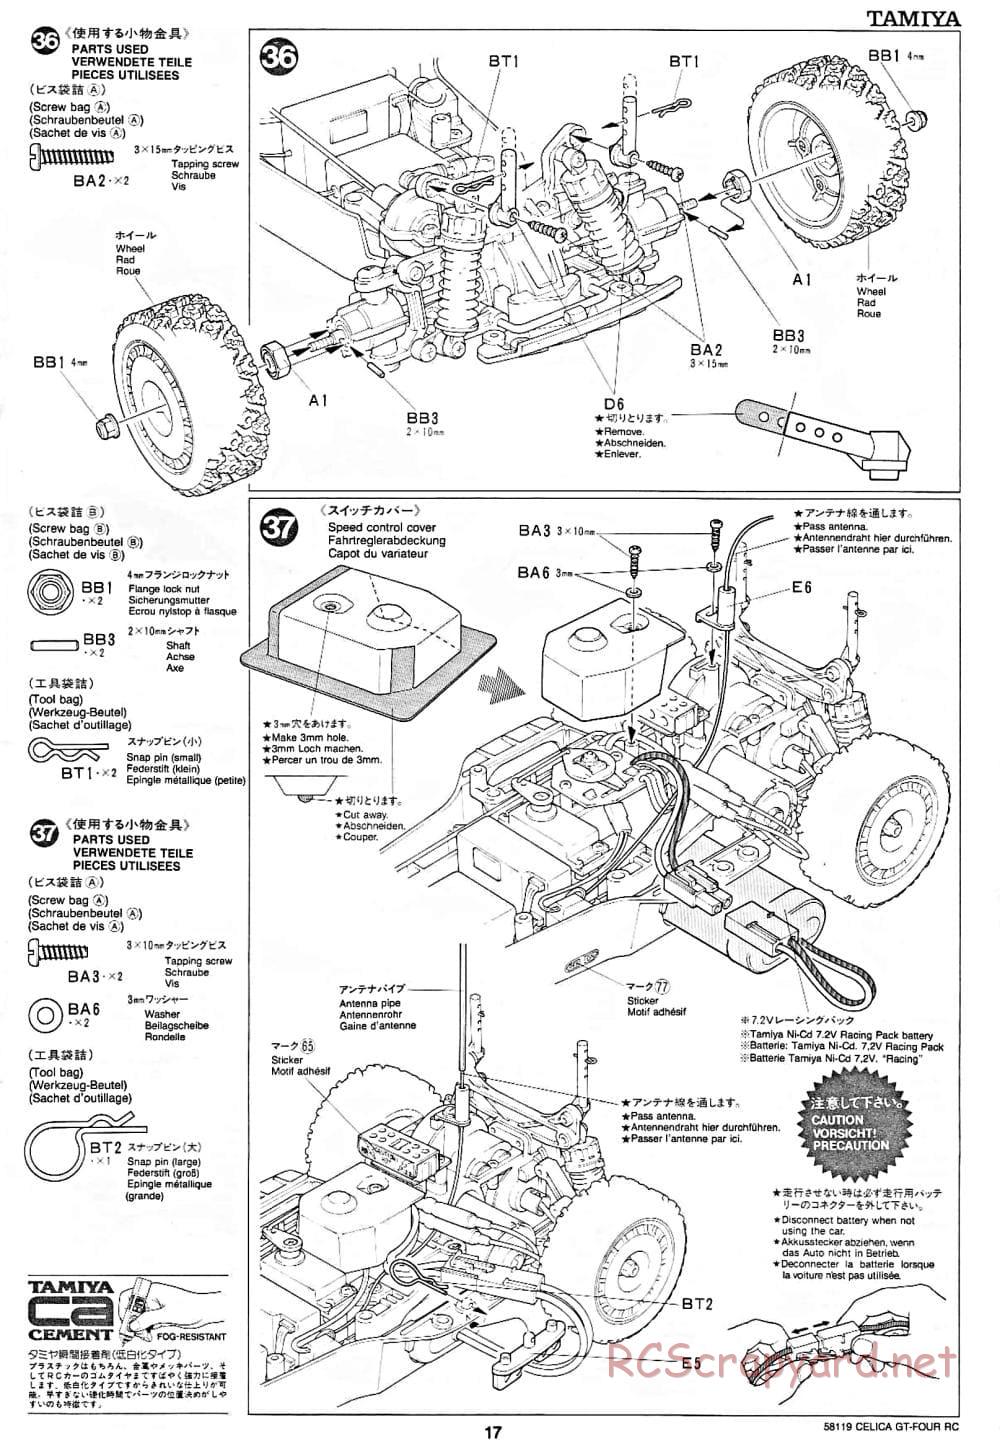 Tamiya - Toyota Celica GT-Four RC - TA-01 Chassis - Manual - Page 17